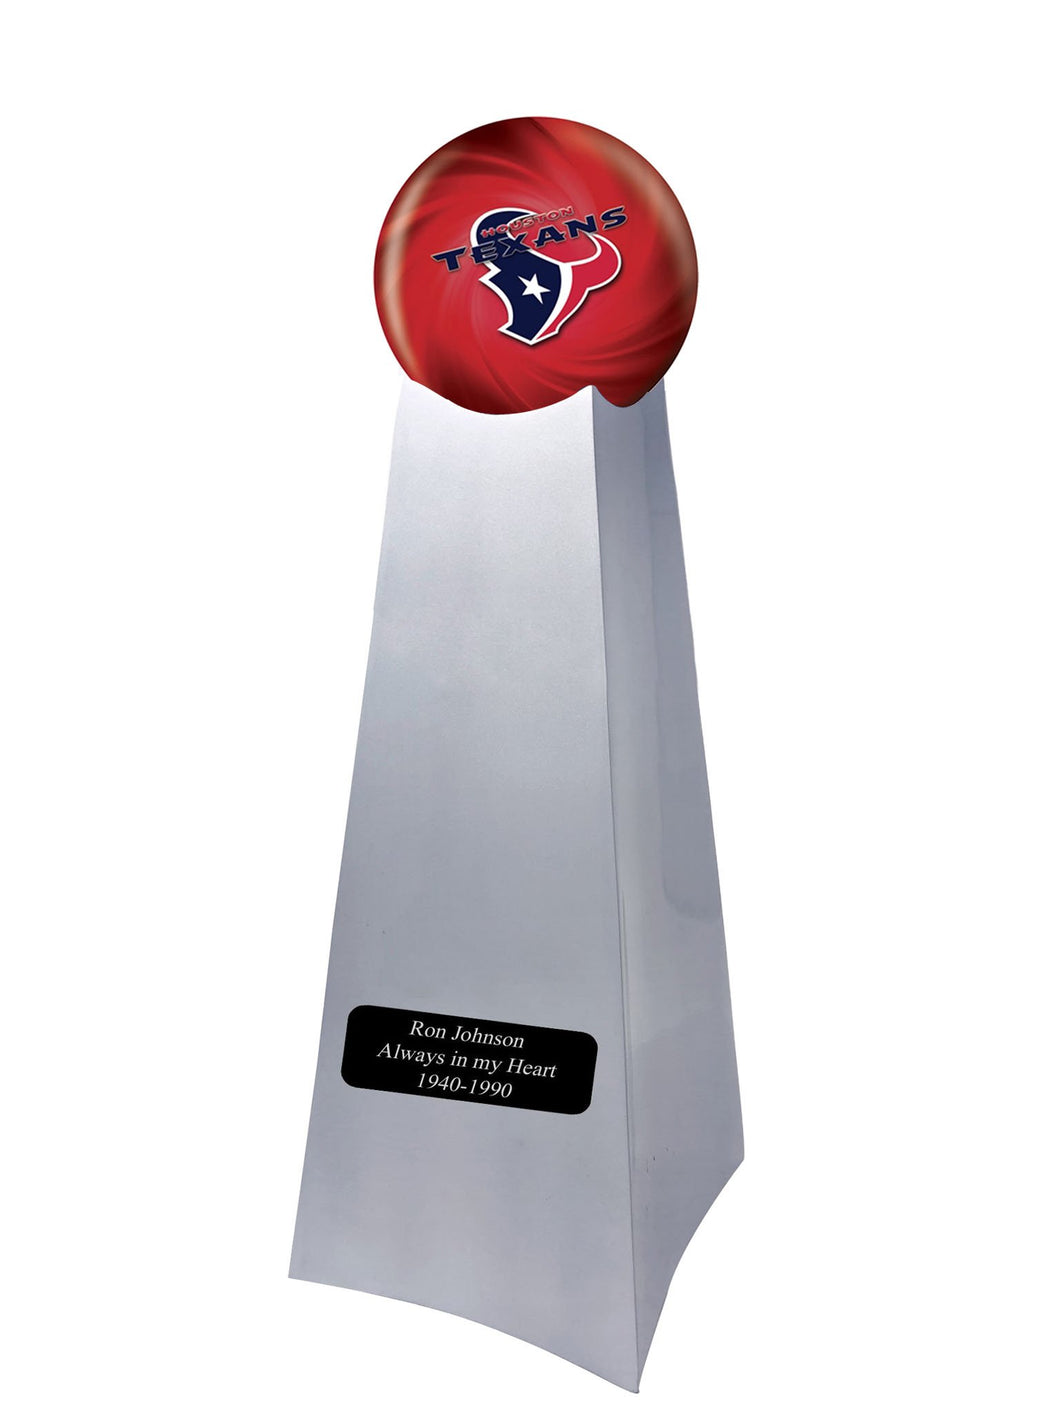 Houston Texans Football Championship Trophy Large/Adult Cremation Urn 200 Cubic Inches